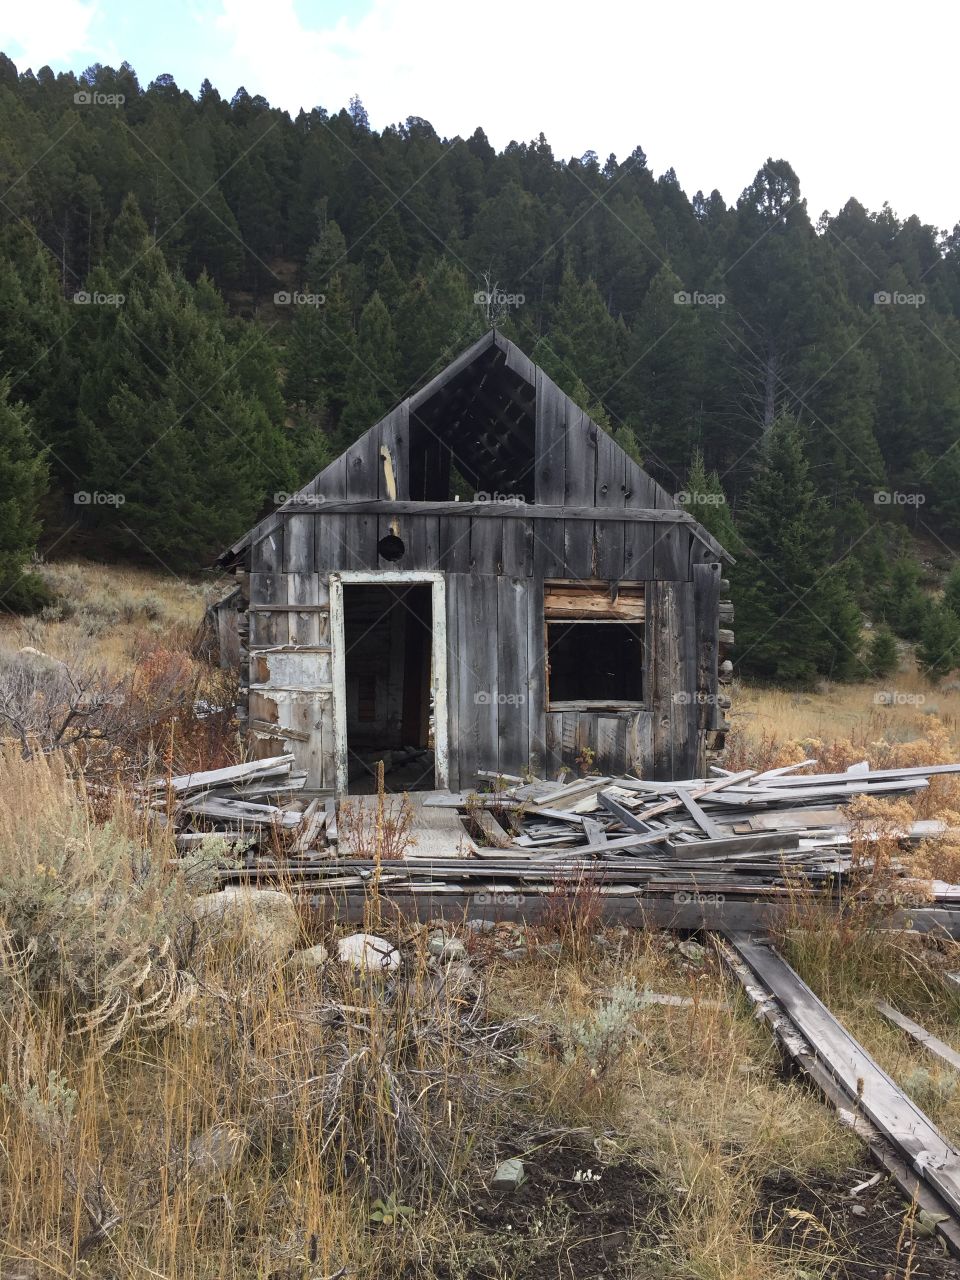 No Person, Abandoned, House, Wood, Rustic